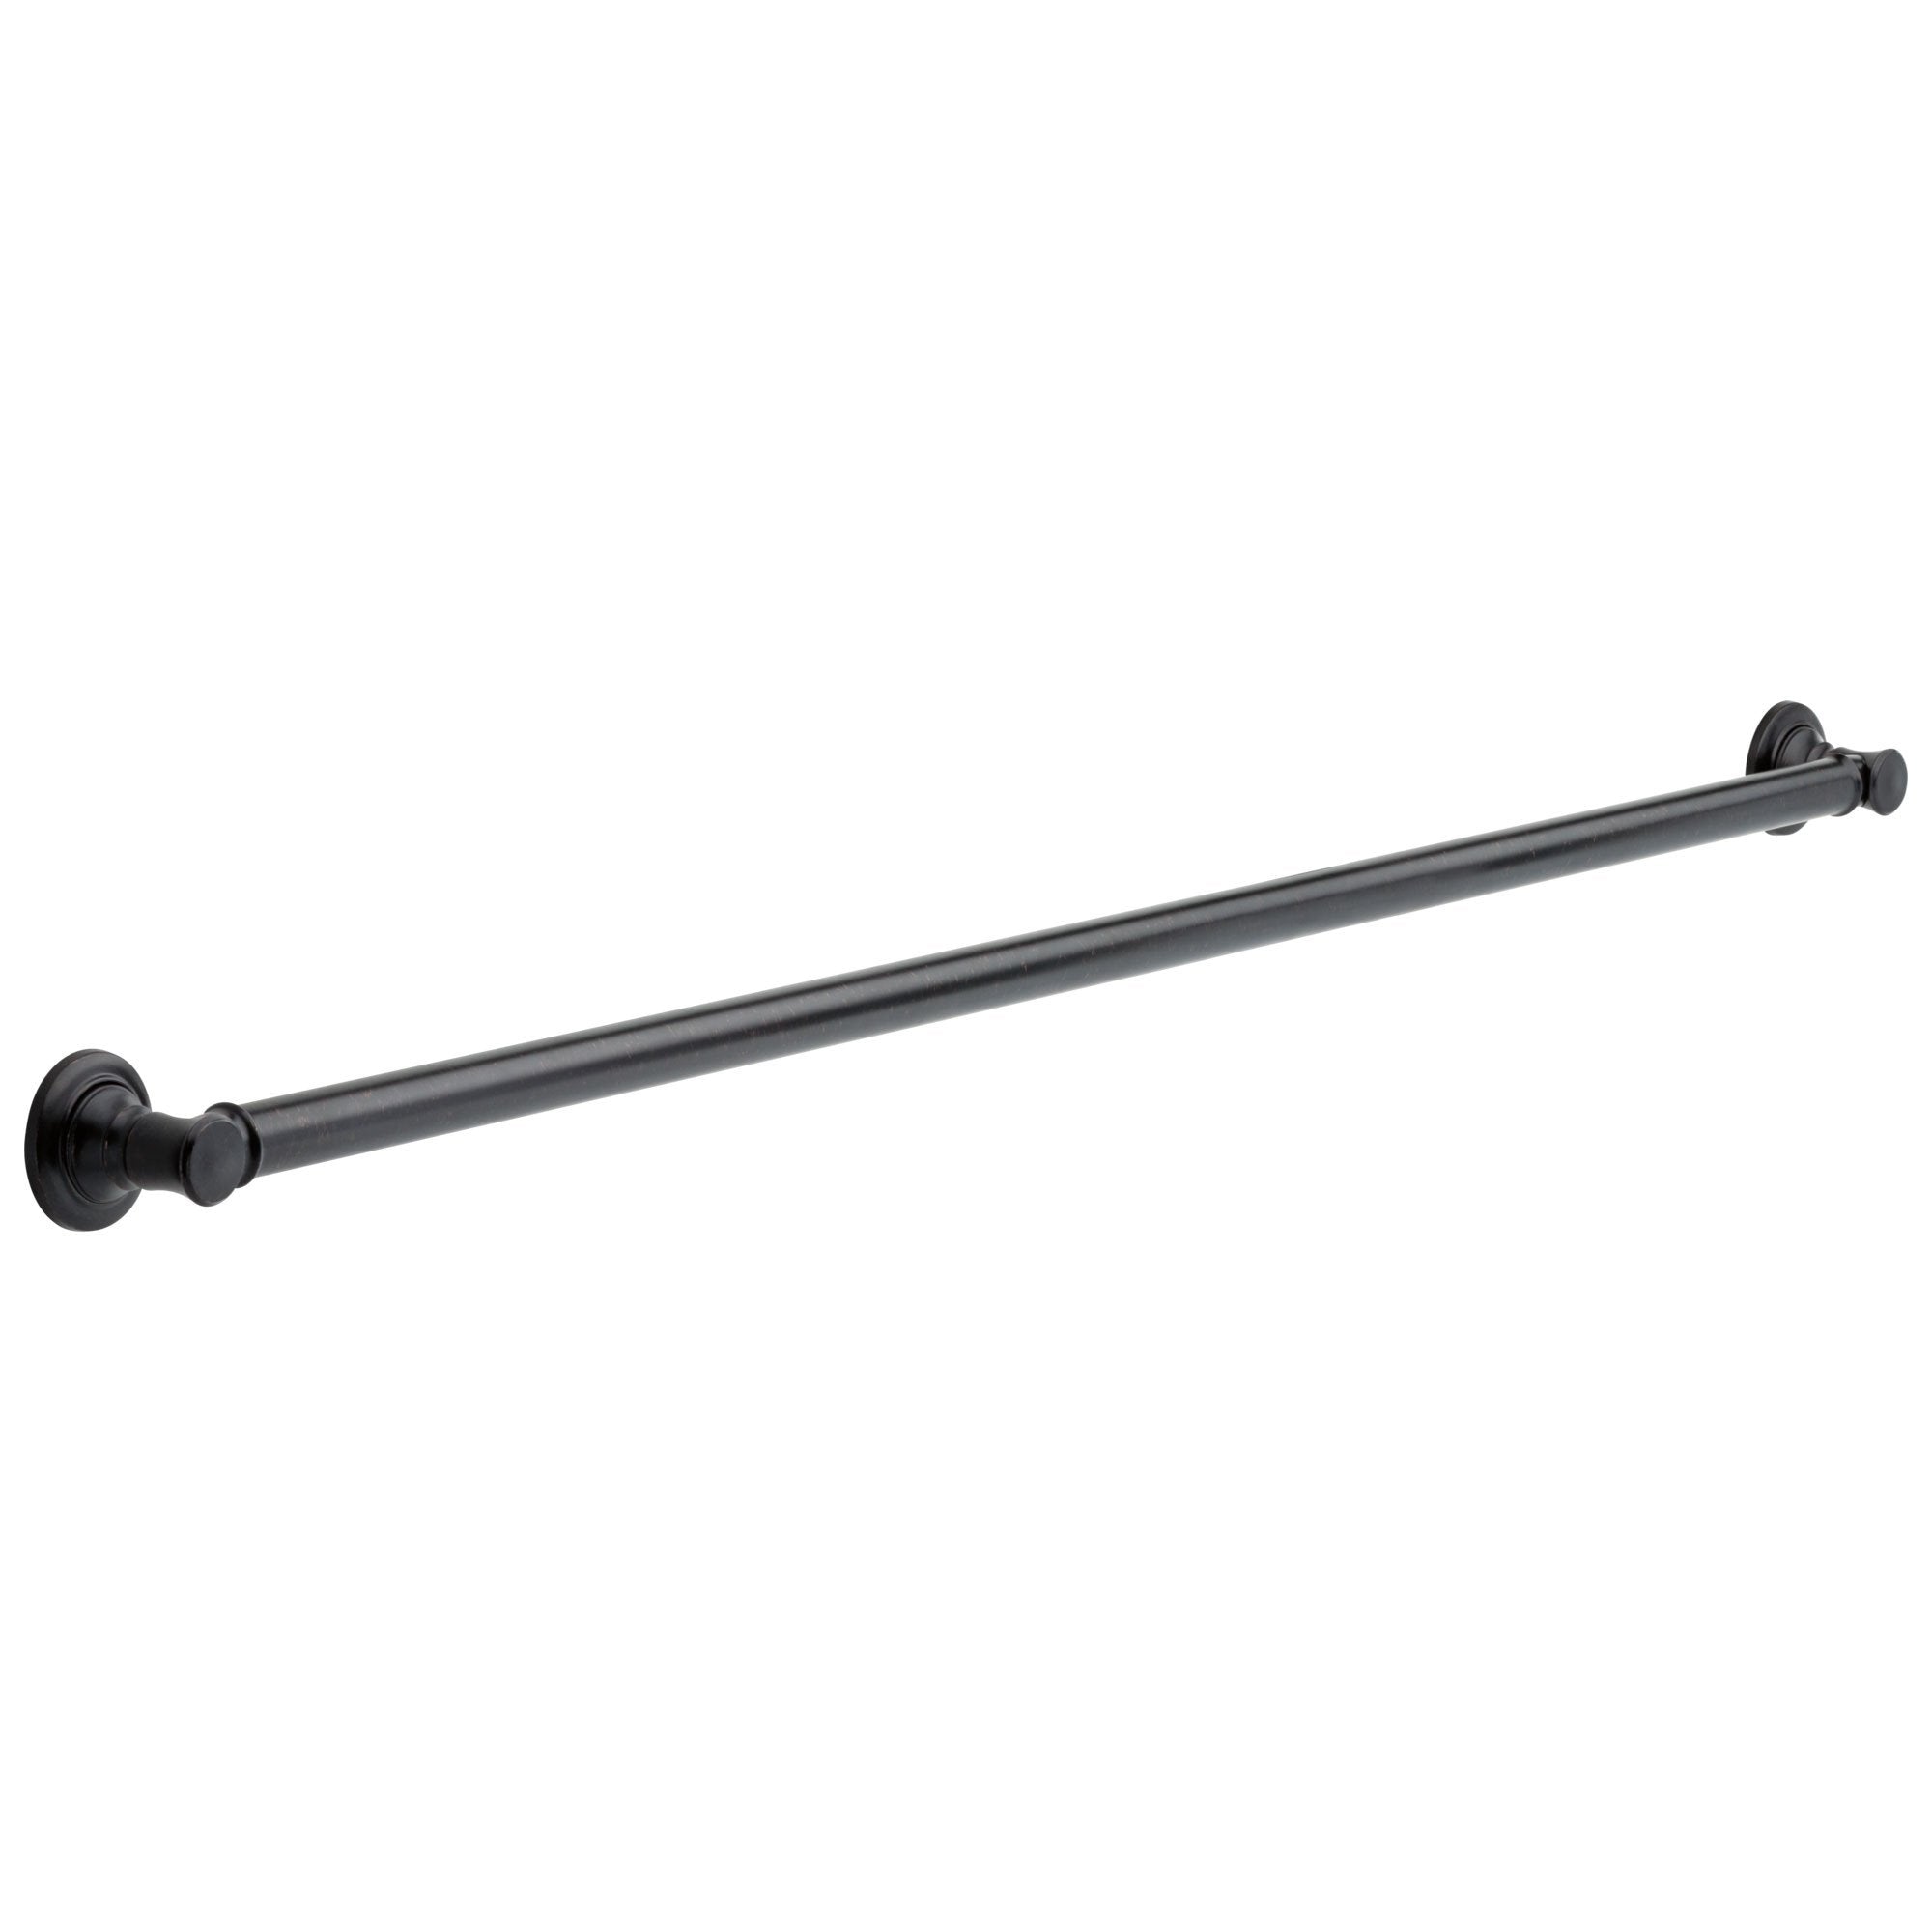 Delta Bath Safety Collection Venetian Bronze Finish Traditional Style Decorative ADA Grab Bar / Towel Bar for Shower or Bathroom - 42" D41642RB